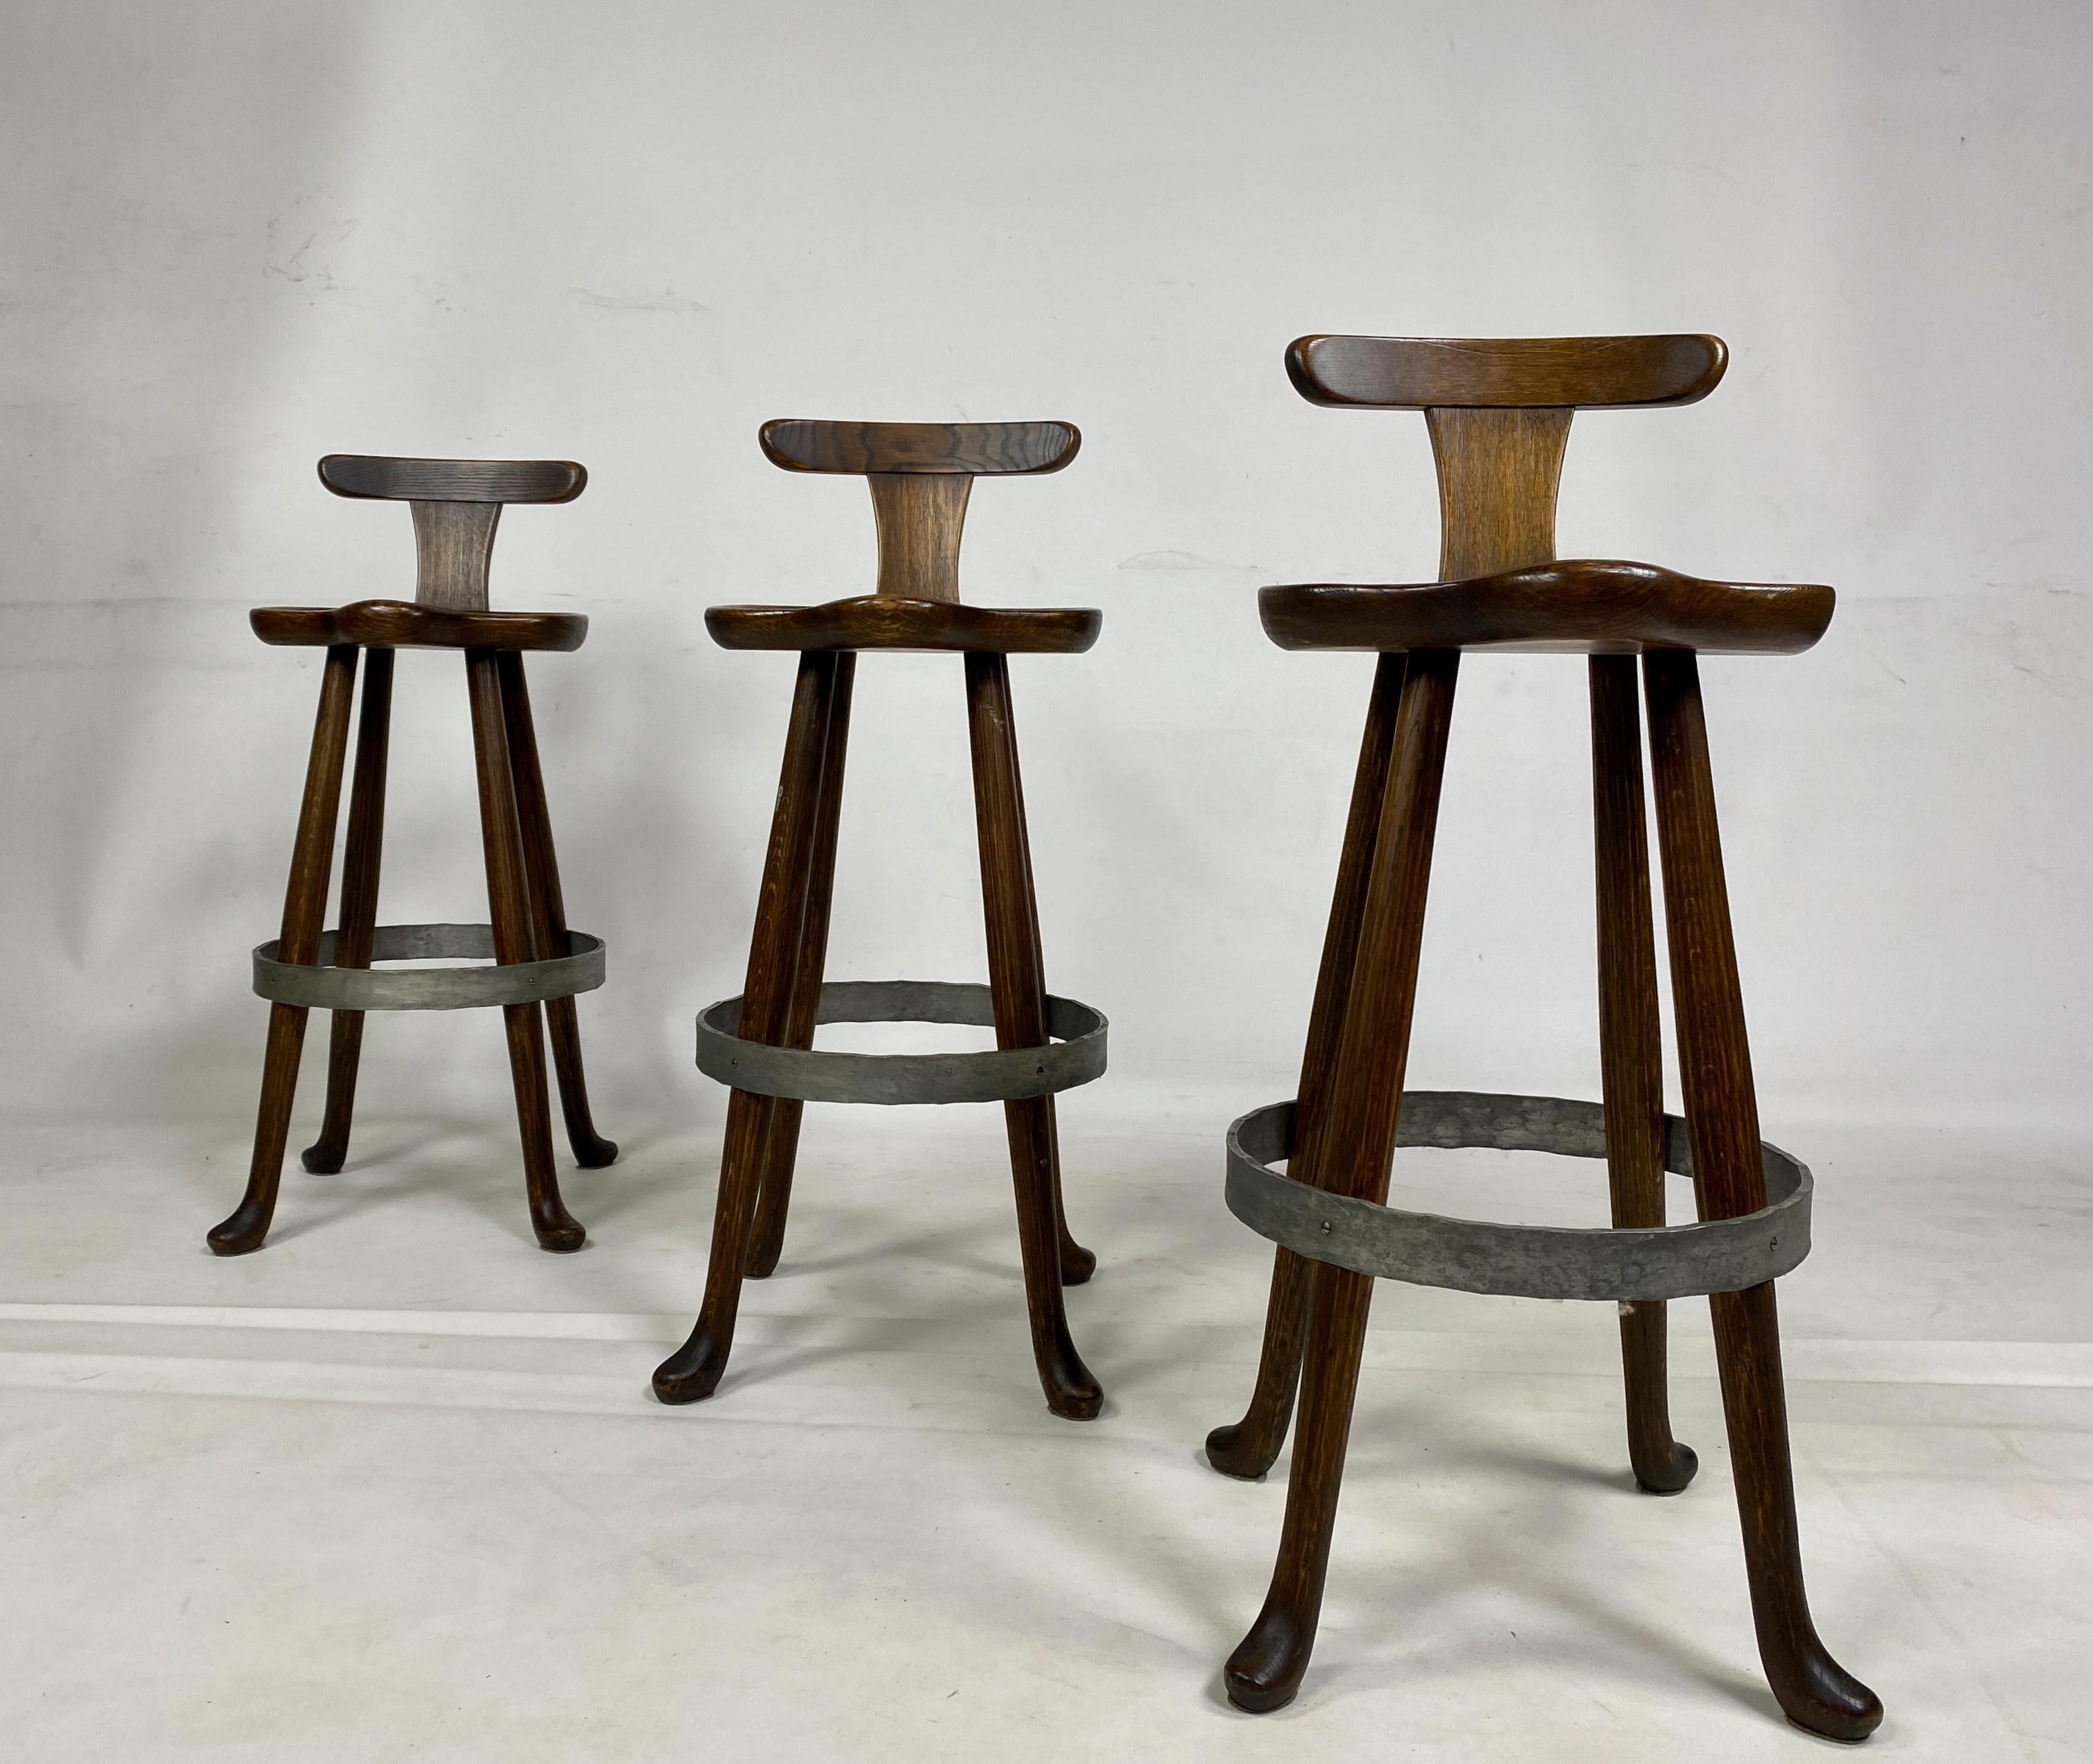 Set of three stools

Oak

Iron foot supporting ring

Adzed seat

Pad feet

France 1960s

Seat height 80cm.